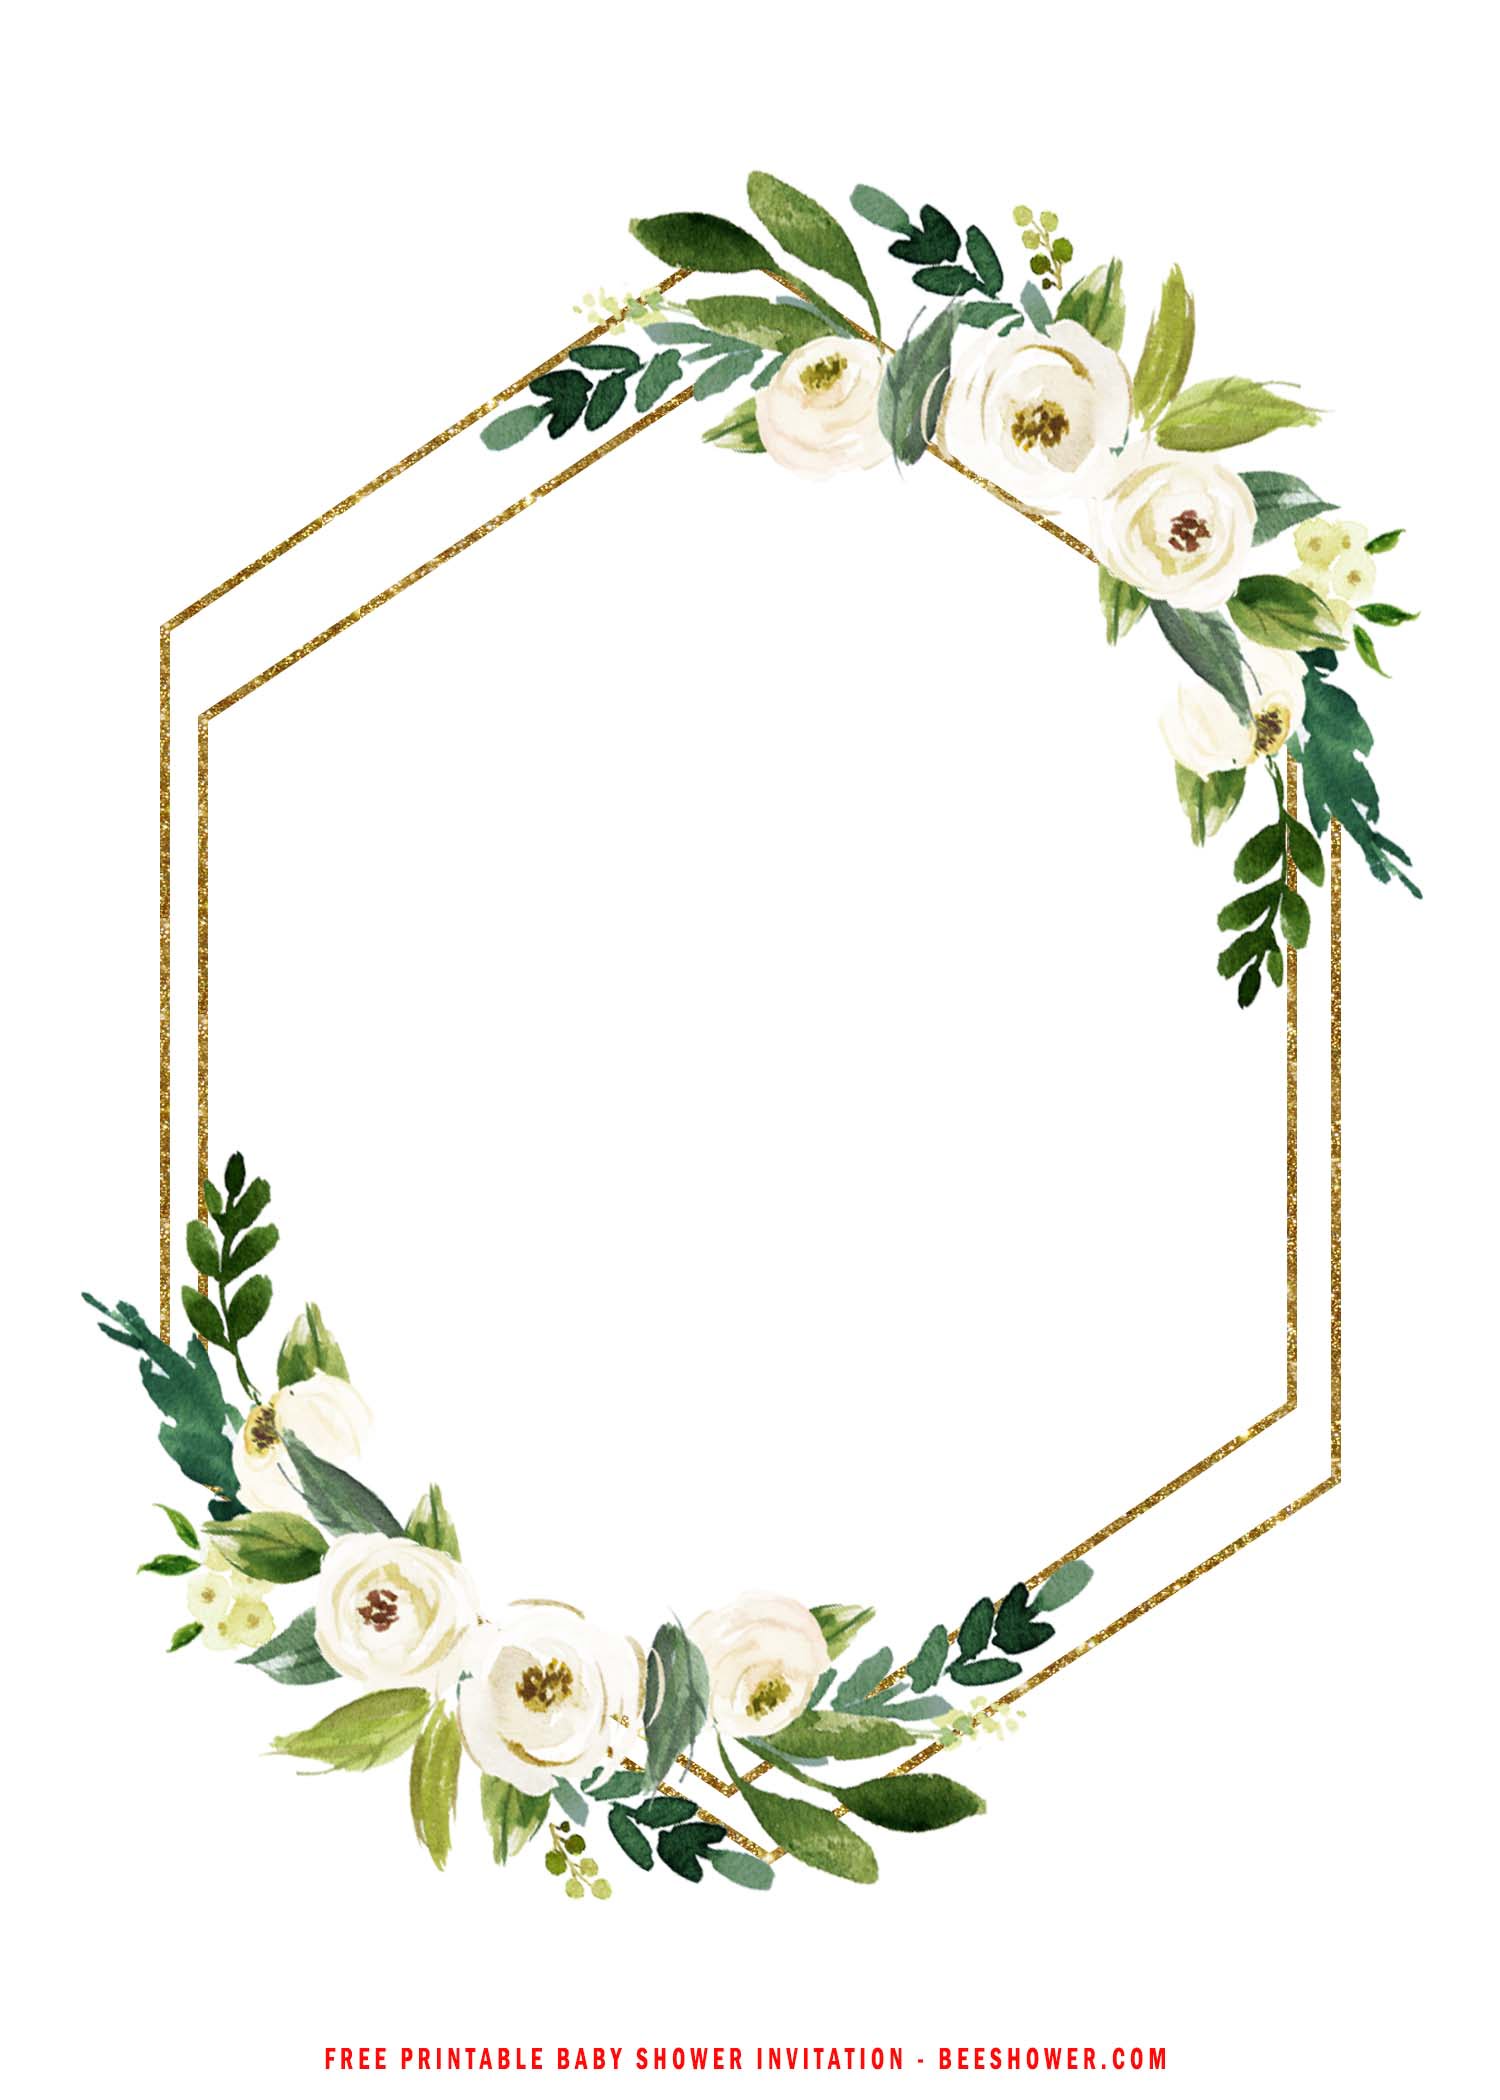 free-printable-greenery-and-gold-frame-baby-shower-invitation